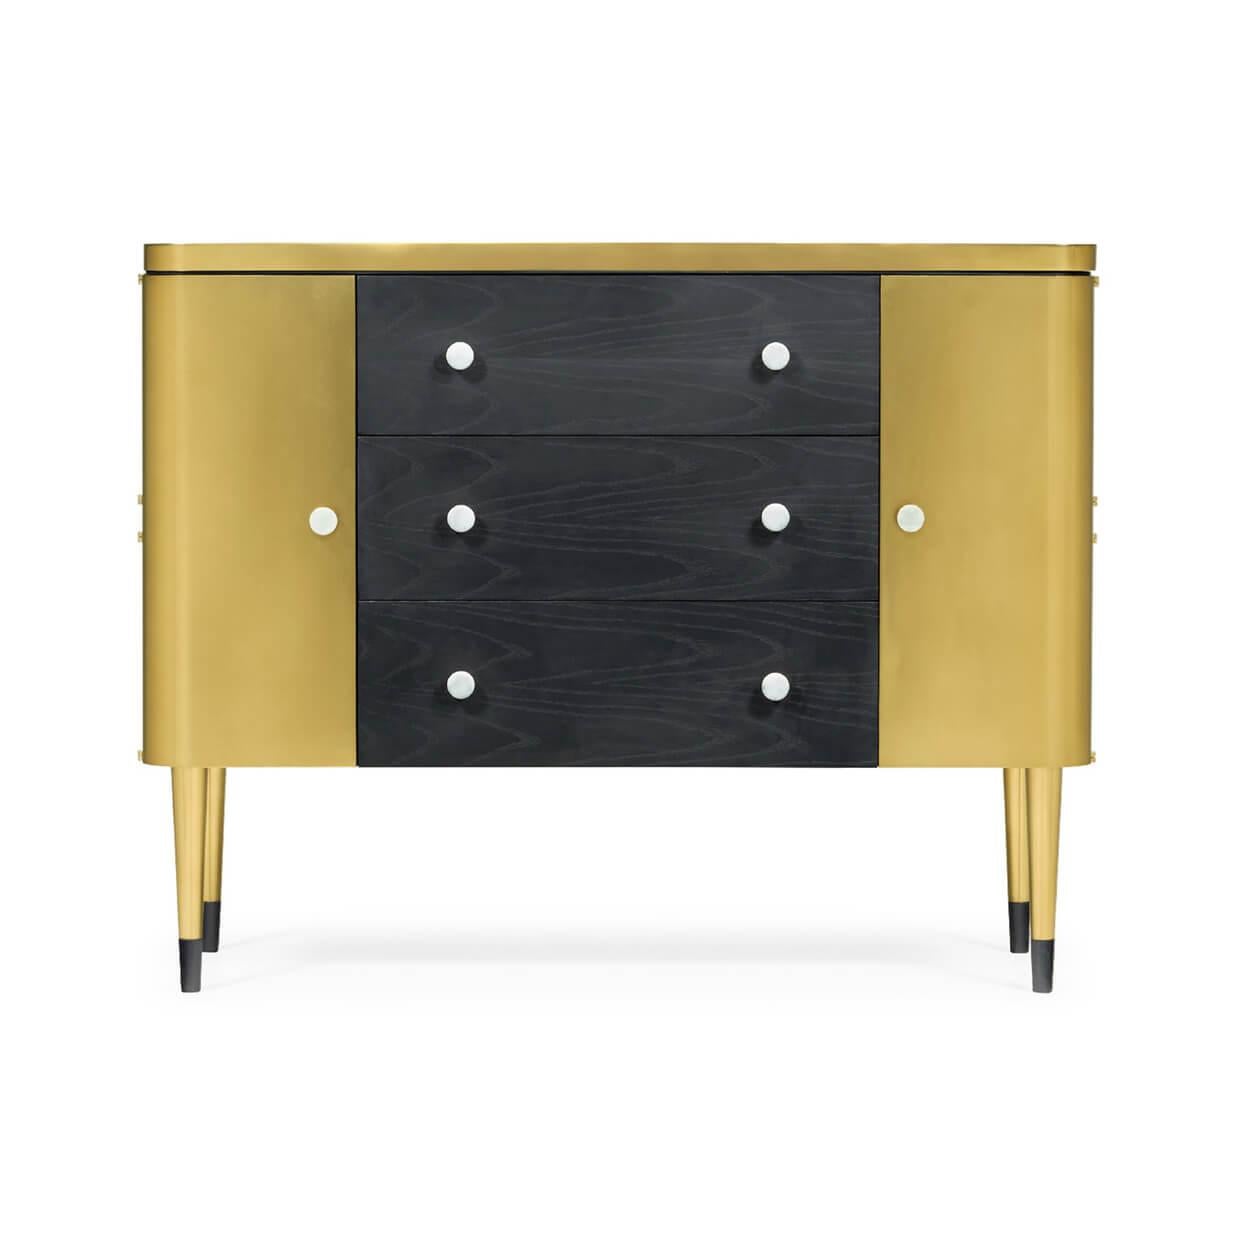 A Mid-Century Modern style storage chest with white marble top, brass trims and panels, and ebonized drawer fronts. The end doors open to reveal interior shelf storage and raised on tapered legs.

Dimensions: 48